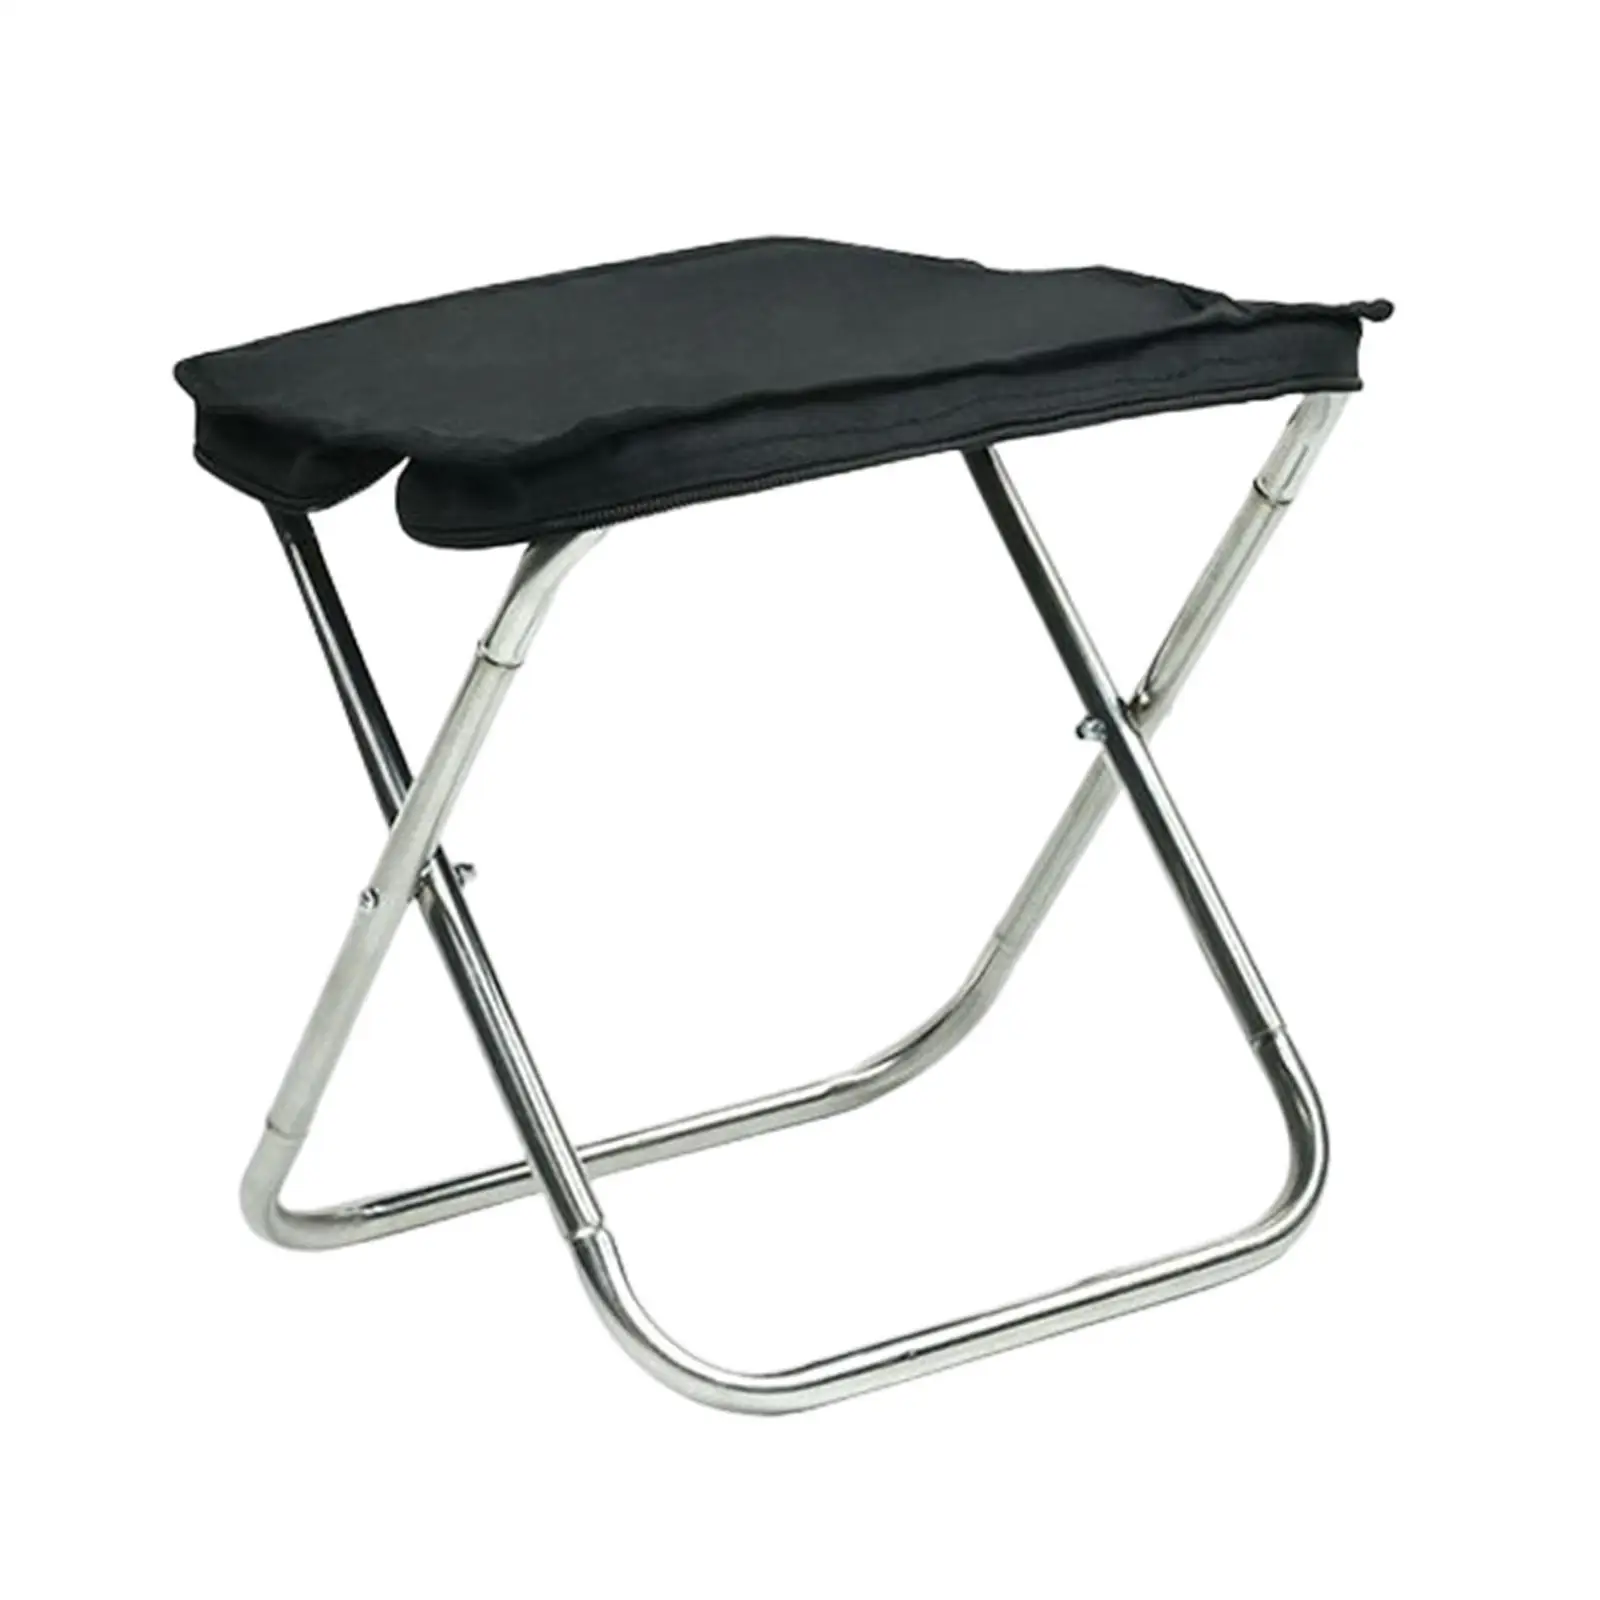 Outdoor Folding Stool Portable Fishing Chair for Backyard Party Backpacking Hiking